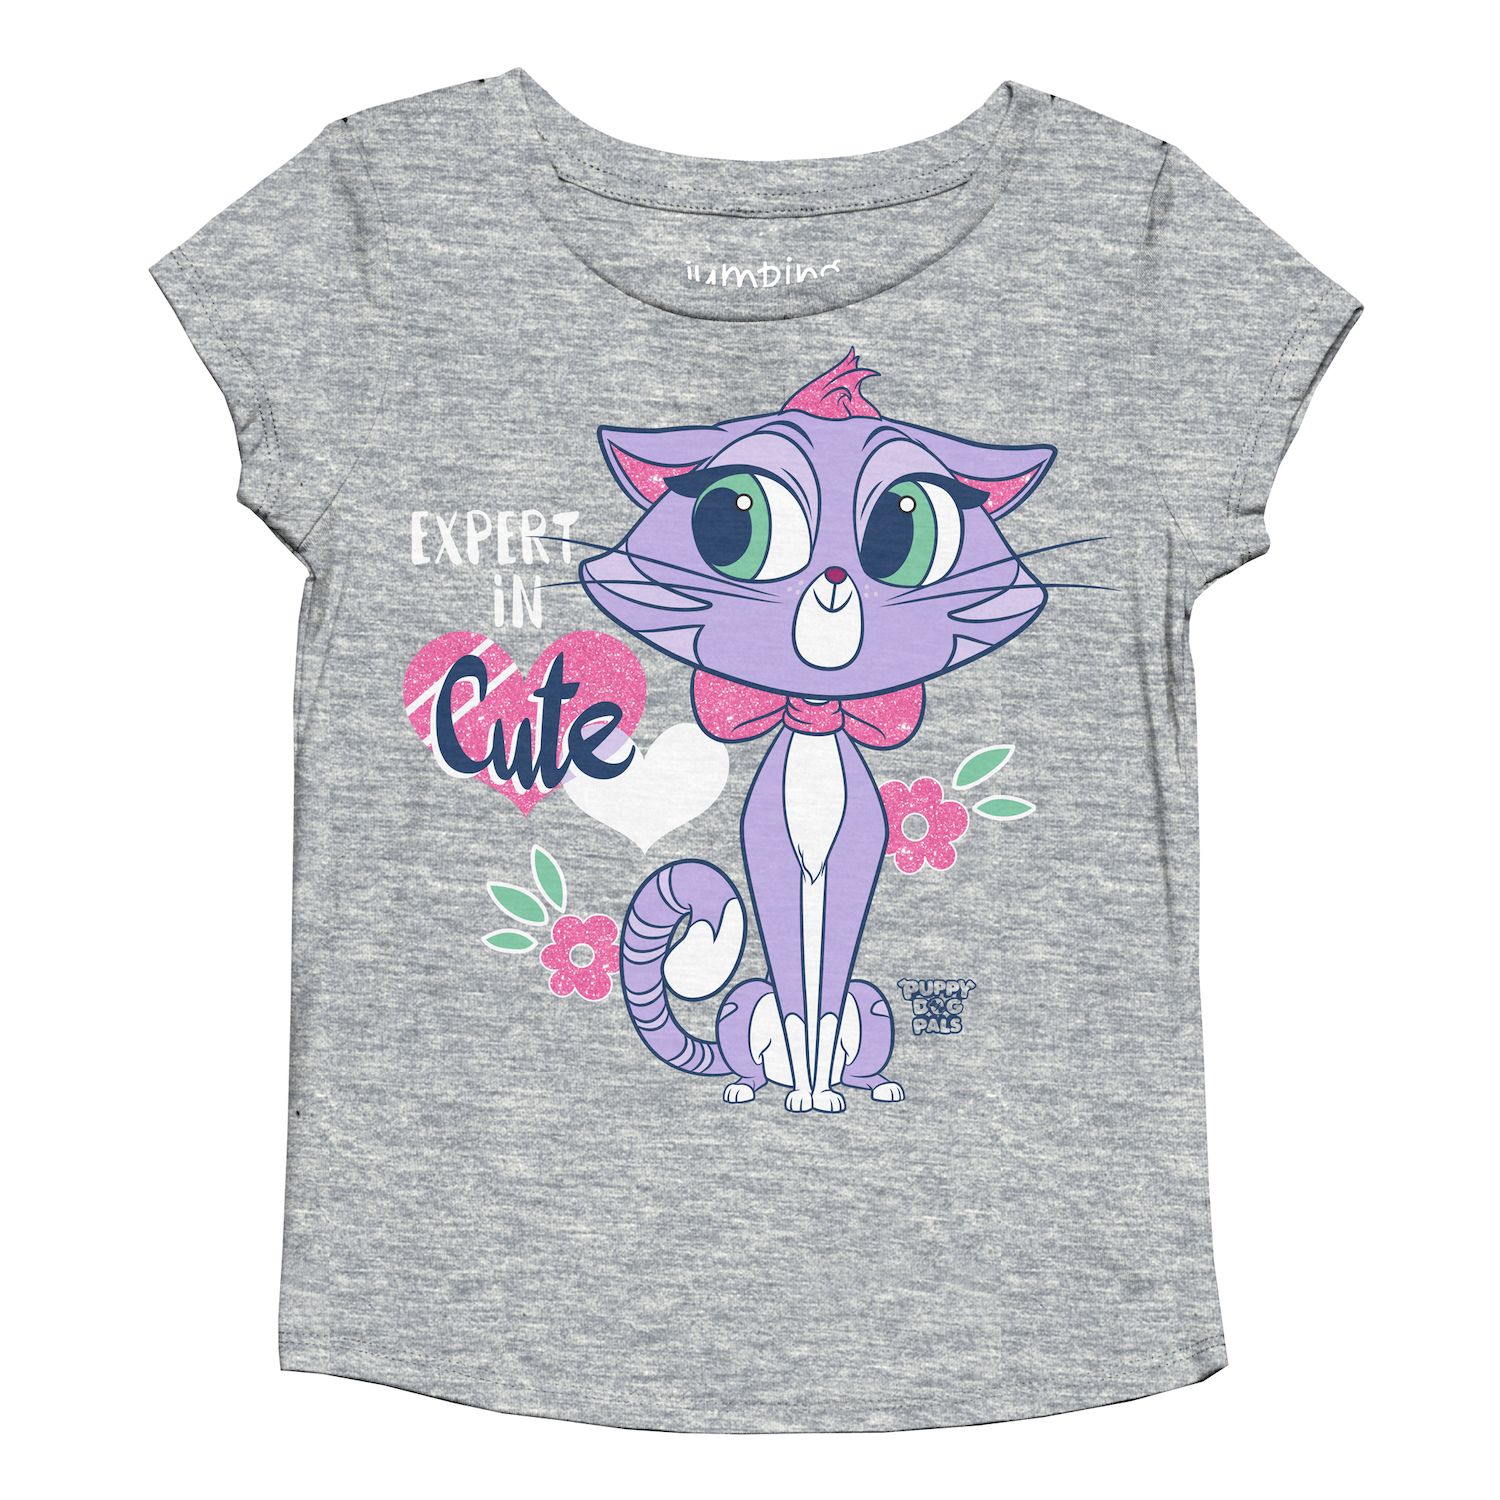 Image for Disney/Jumping Beans Disney's Puppy Dog Pals Toddler Girl Expert In Cute Graphic Tee by Jumping Beans® at Kohl's.